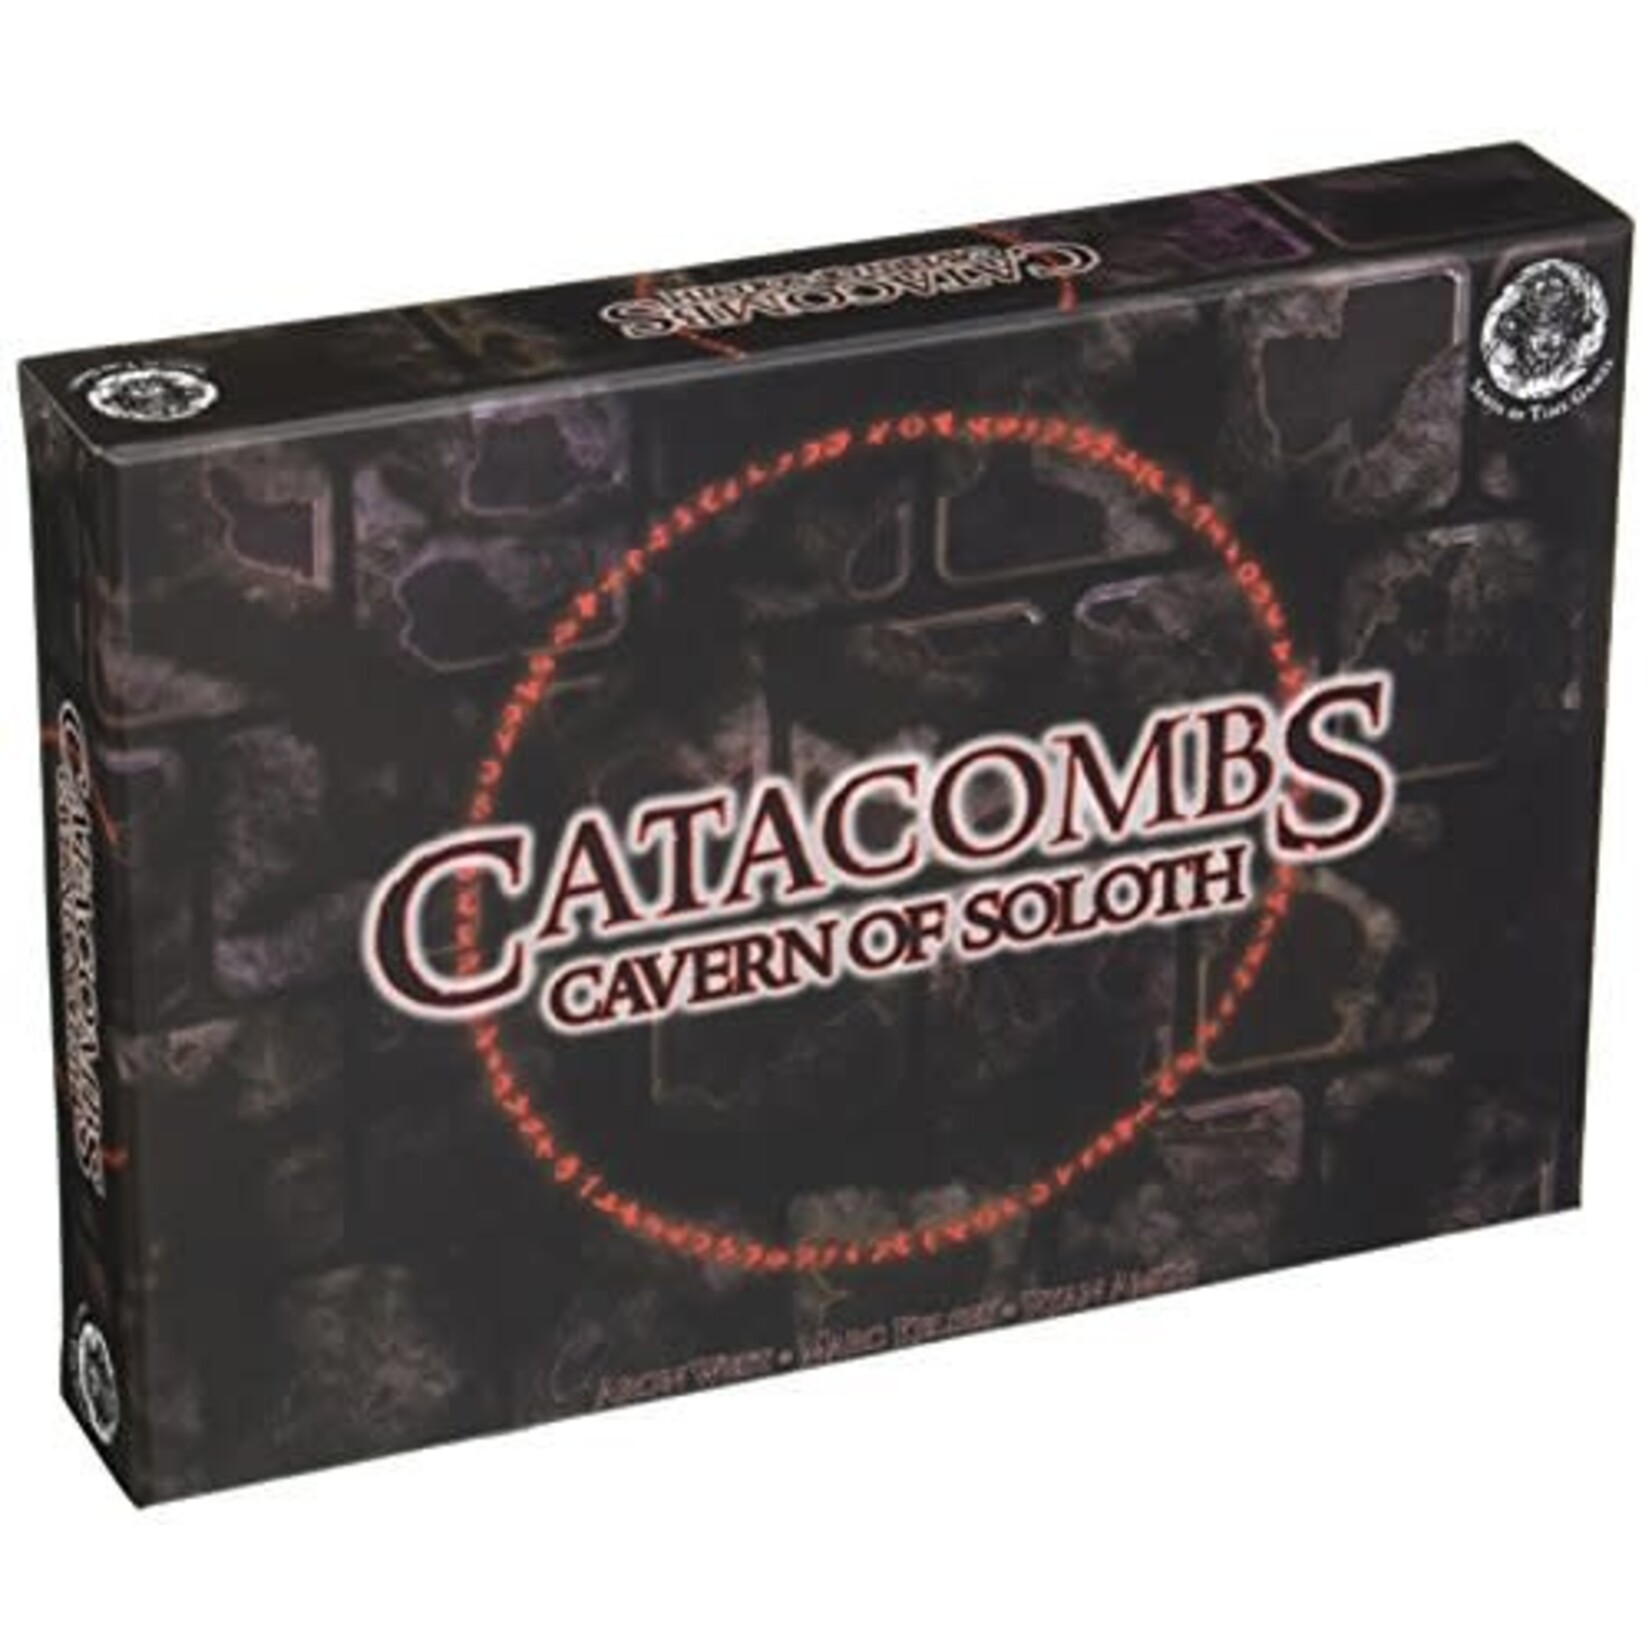 Catacombs: Caverns of Soloth 2nd Edition